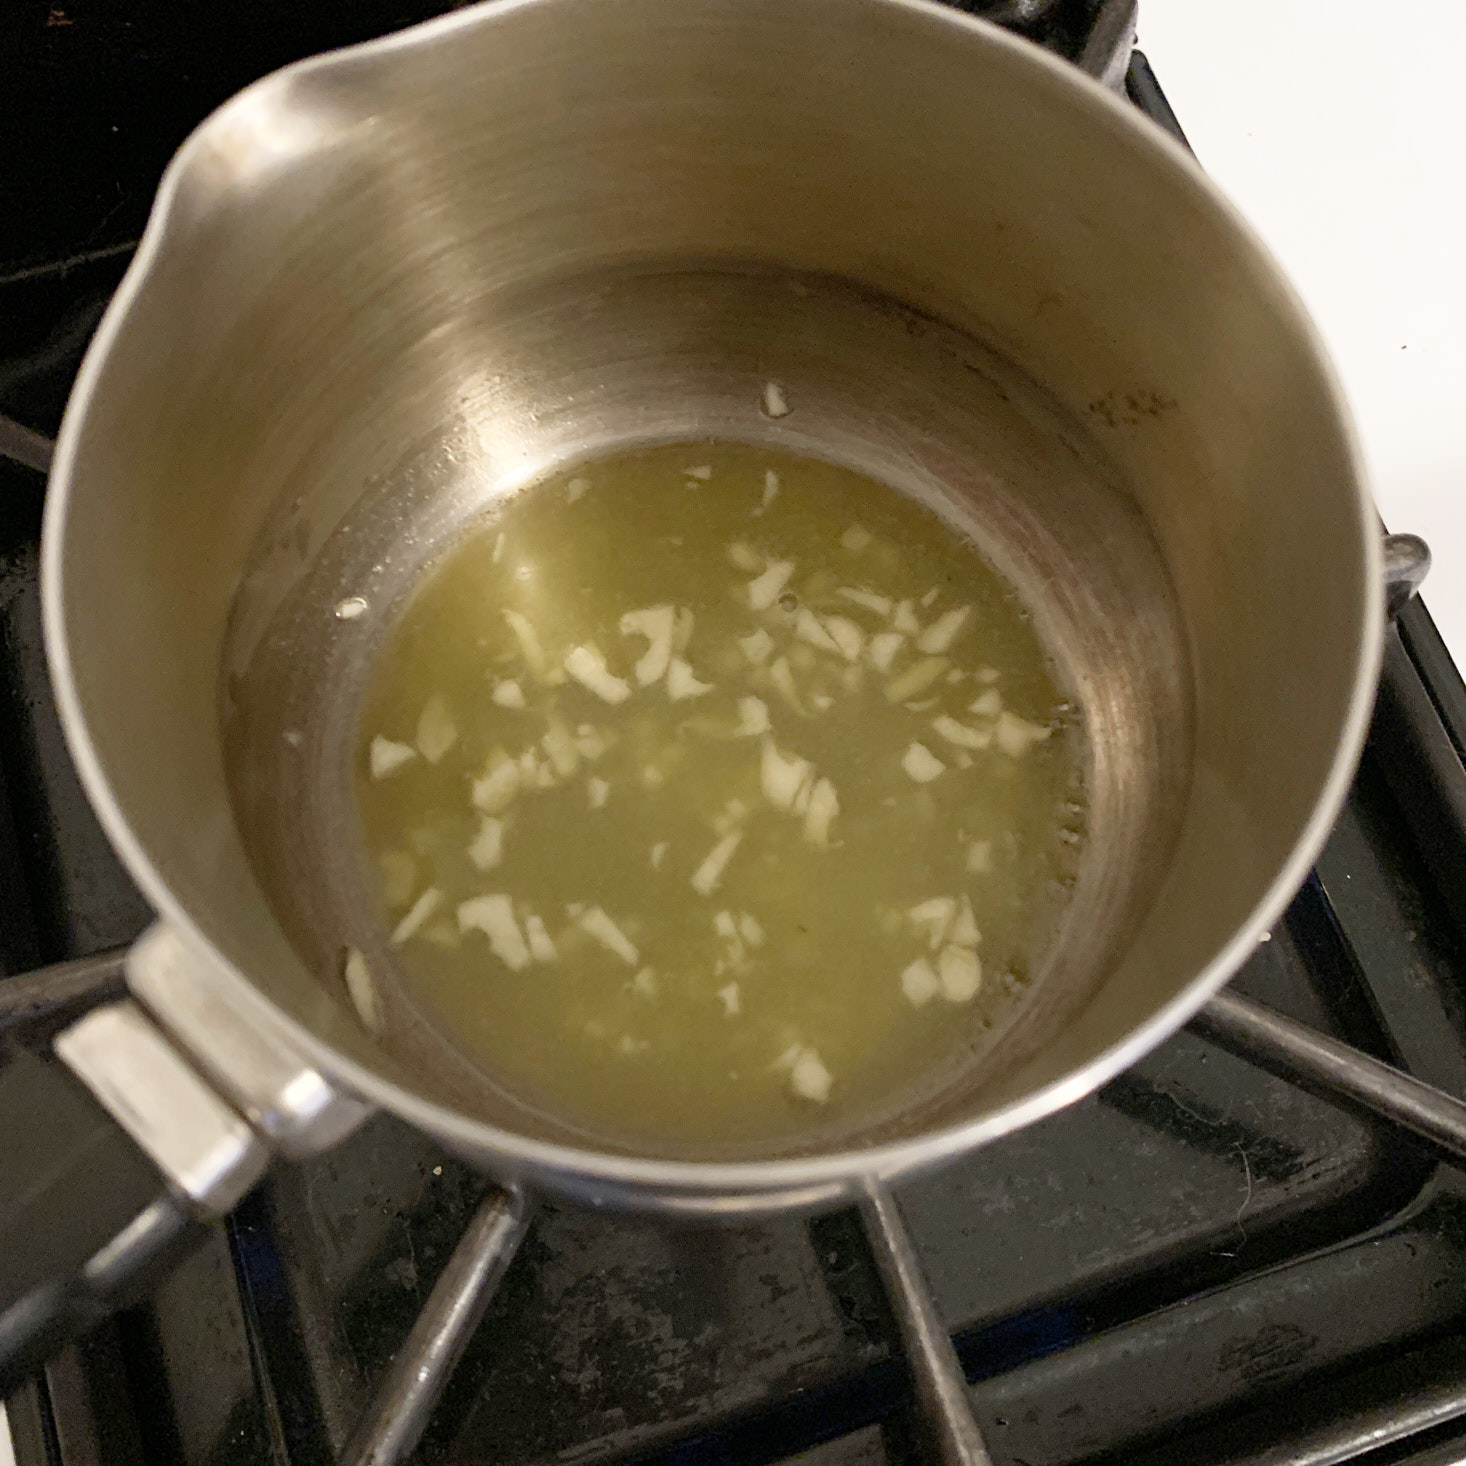 Oil, butter, and garlic in a pot, melting